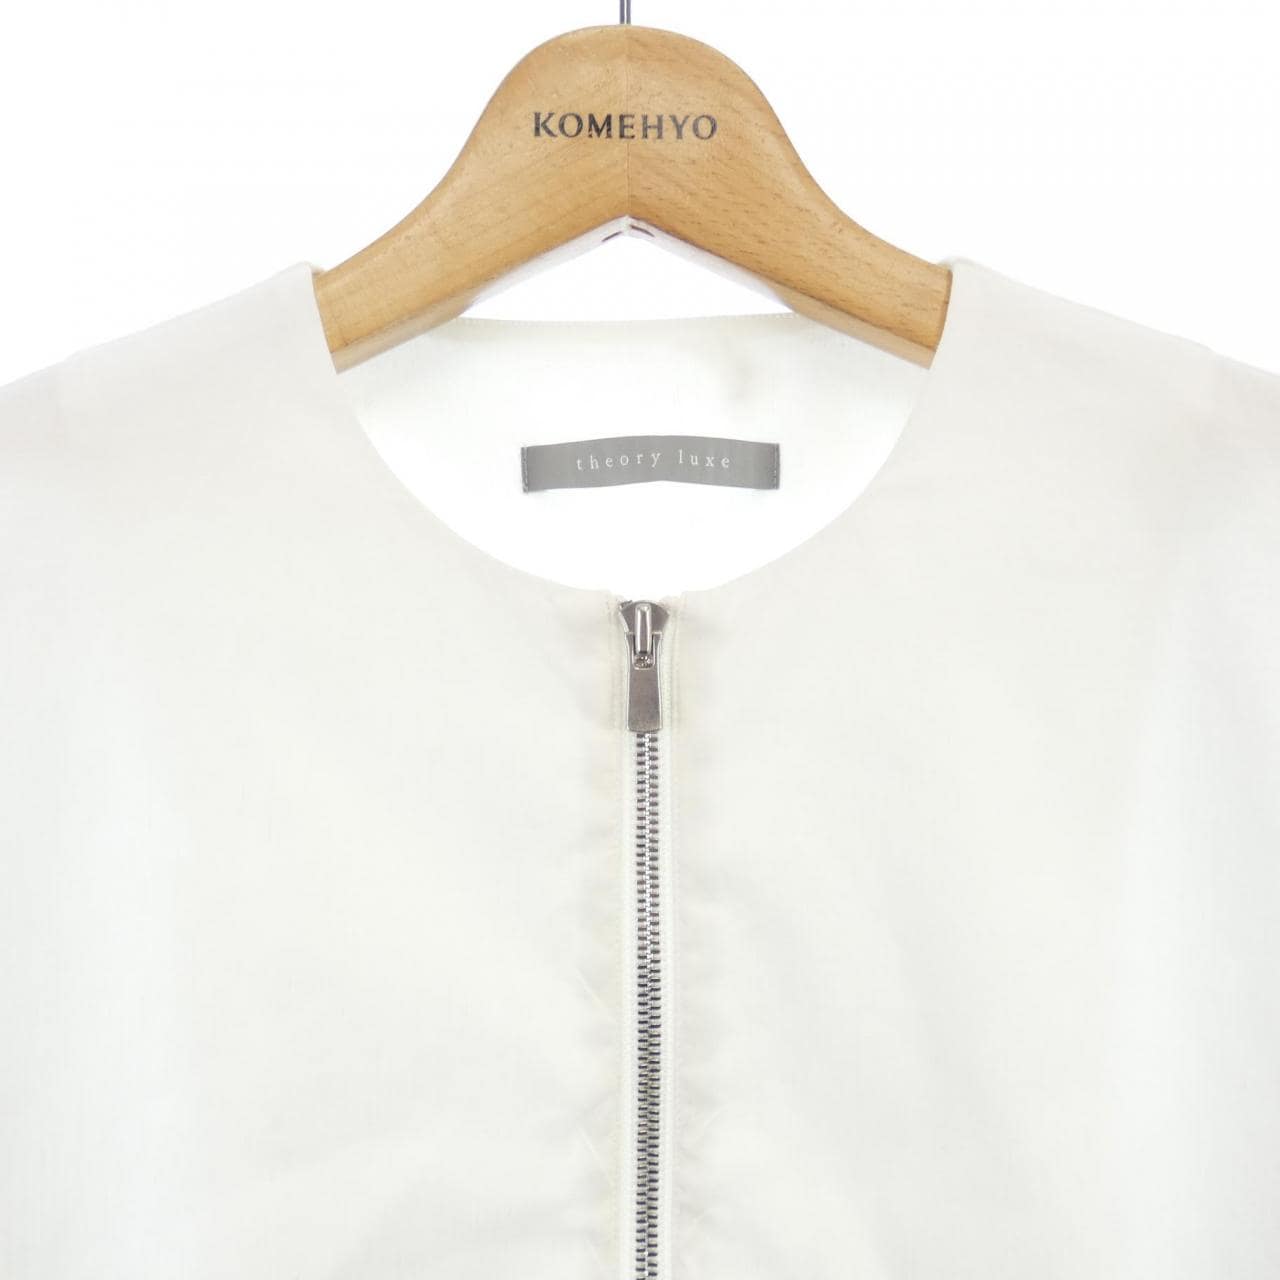 Theory luxe blouson